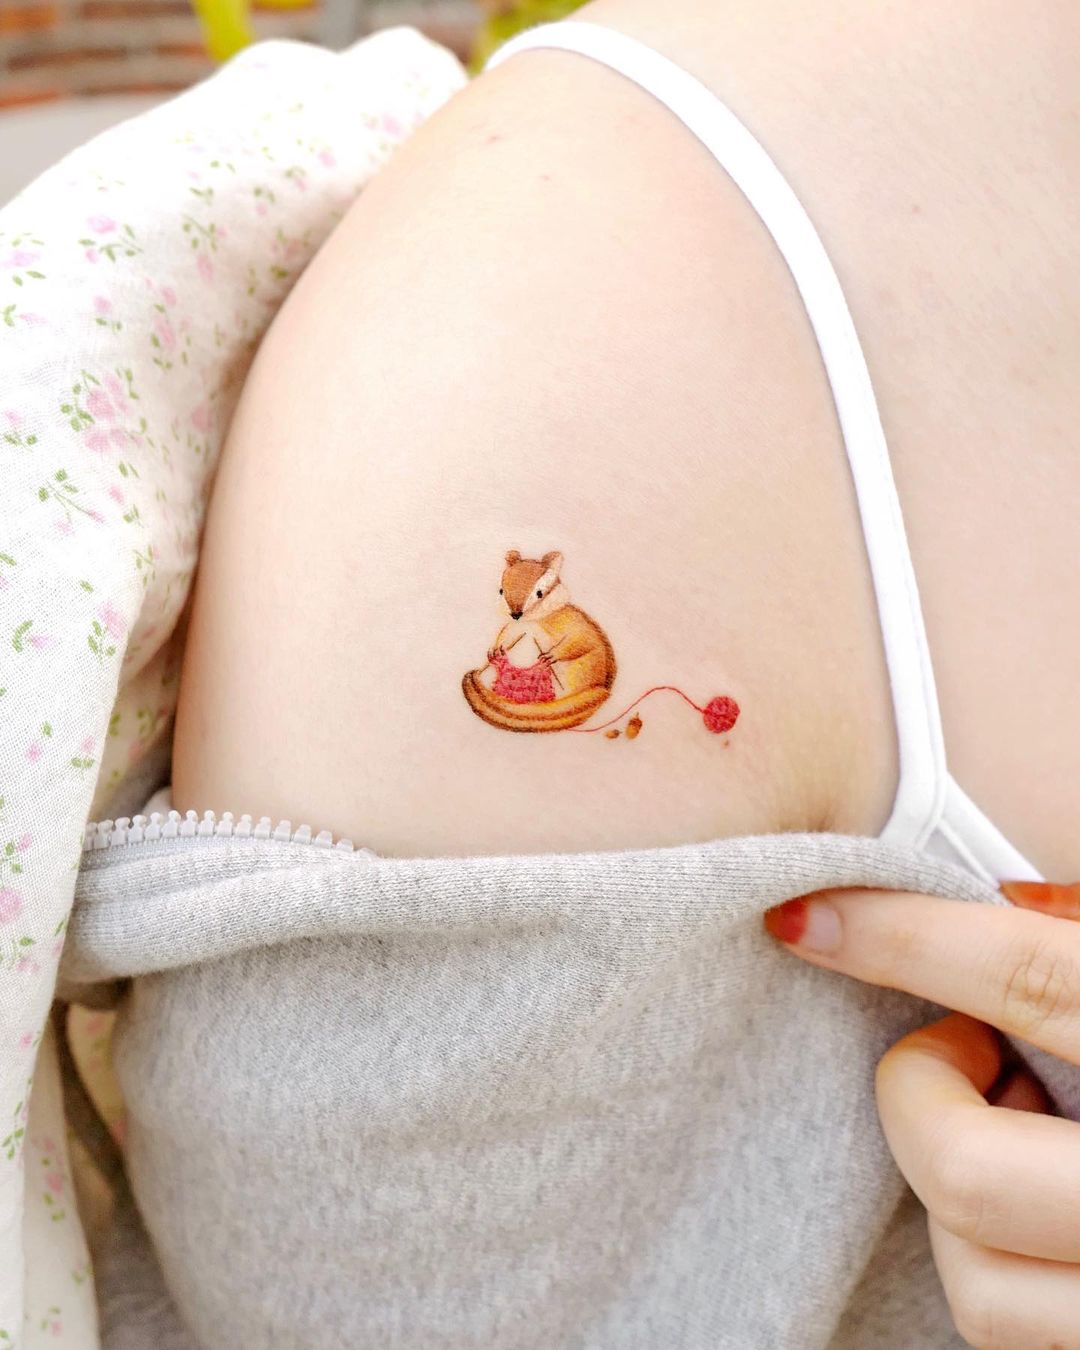 25 best first tattoo ideas and the least painful spots to get them 